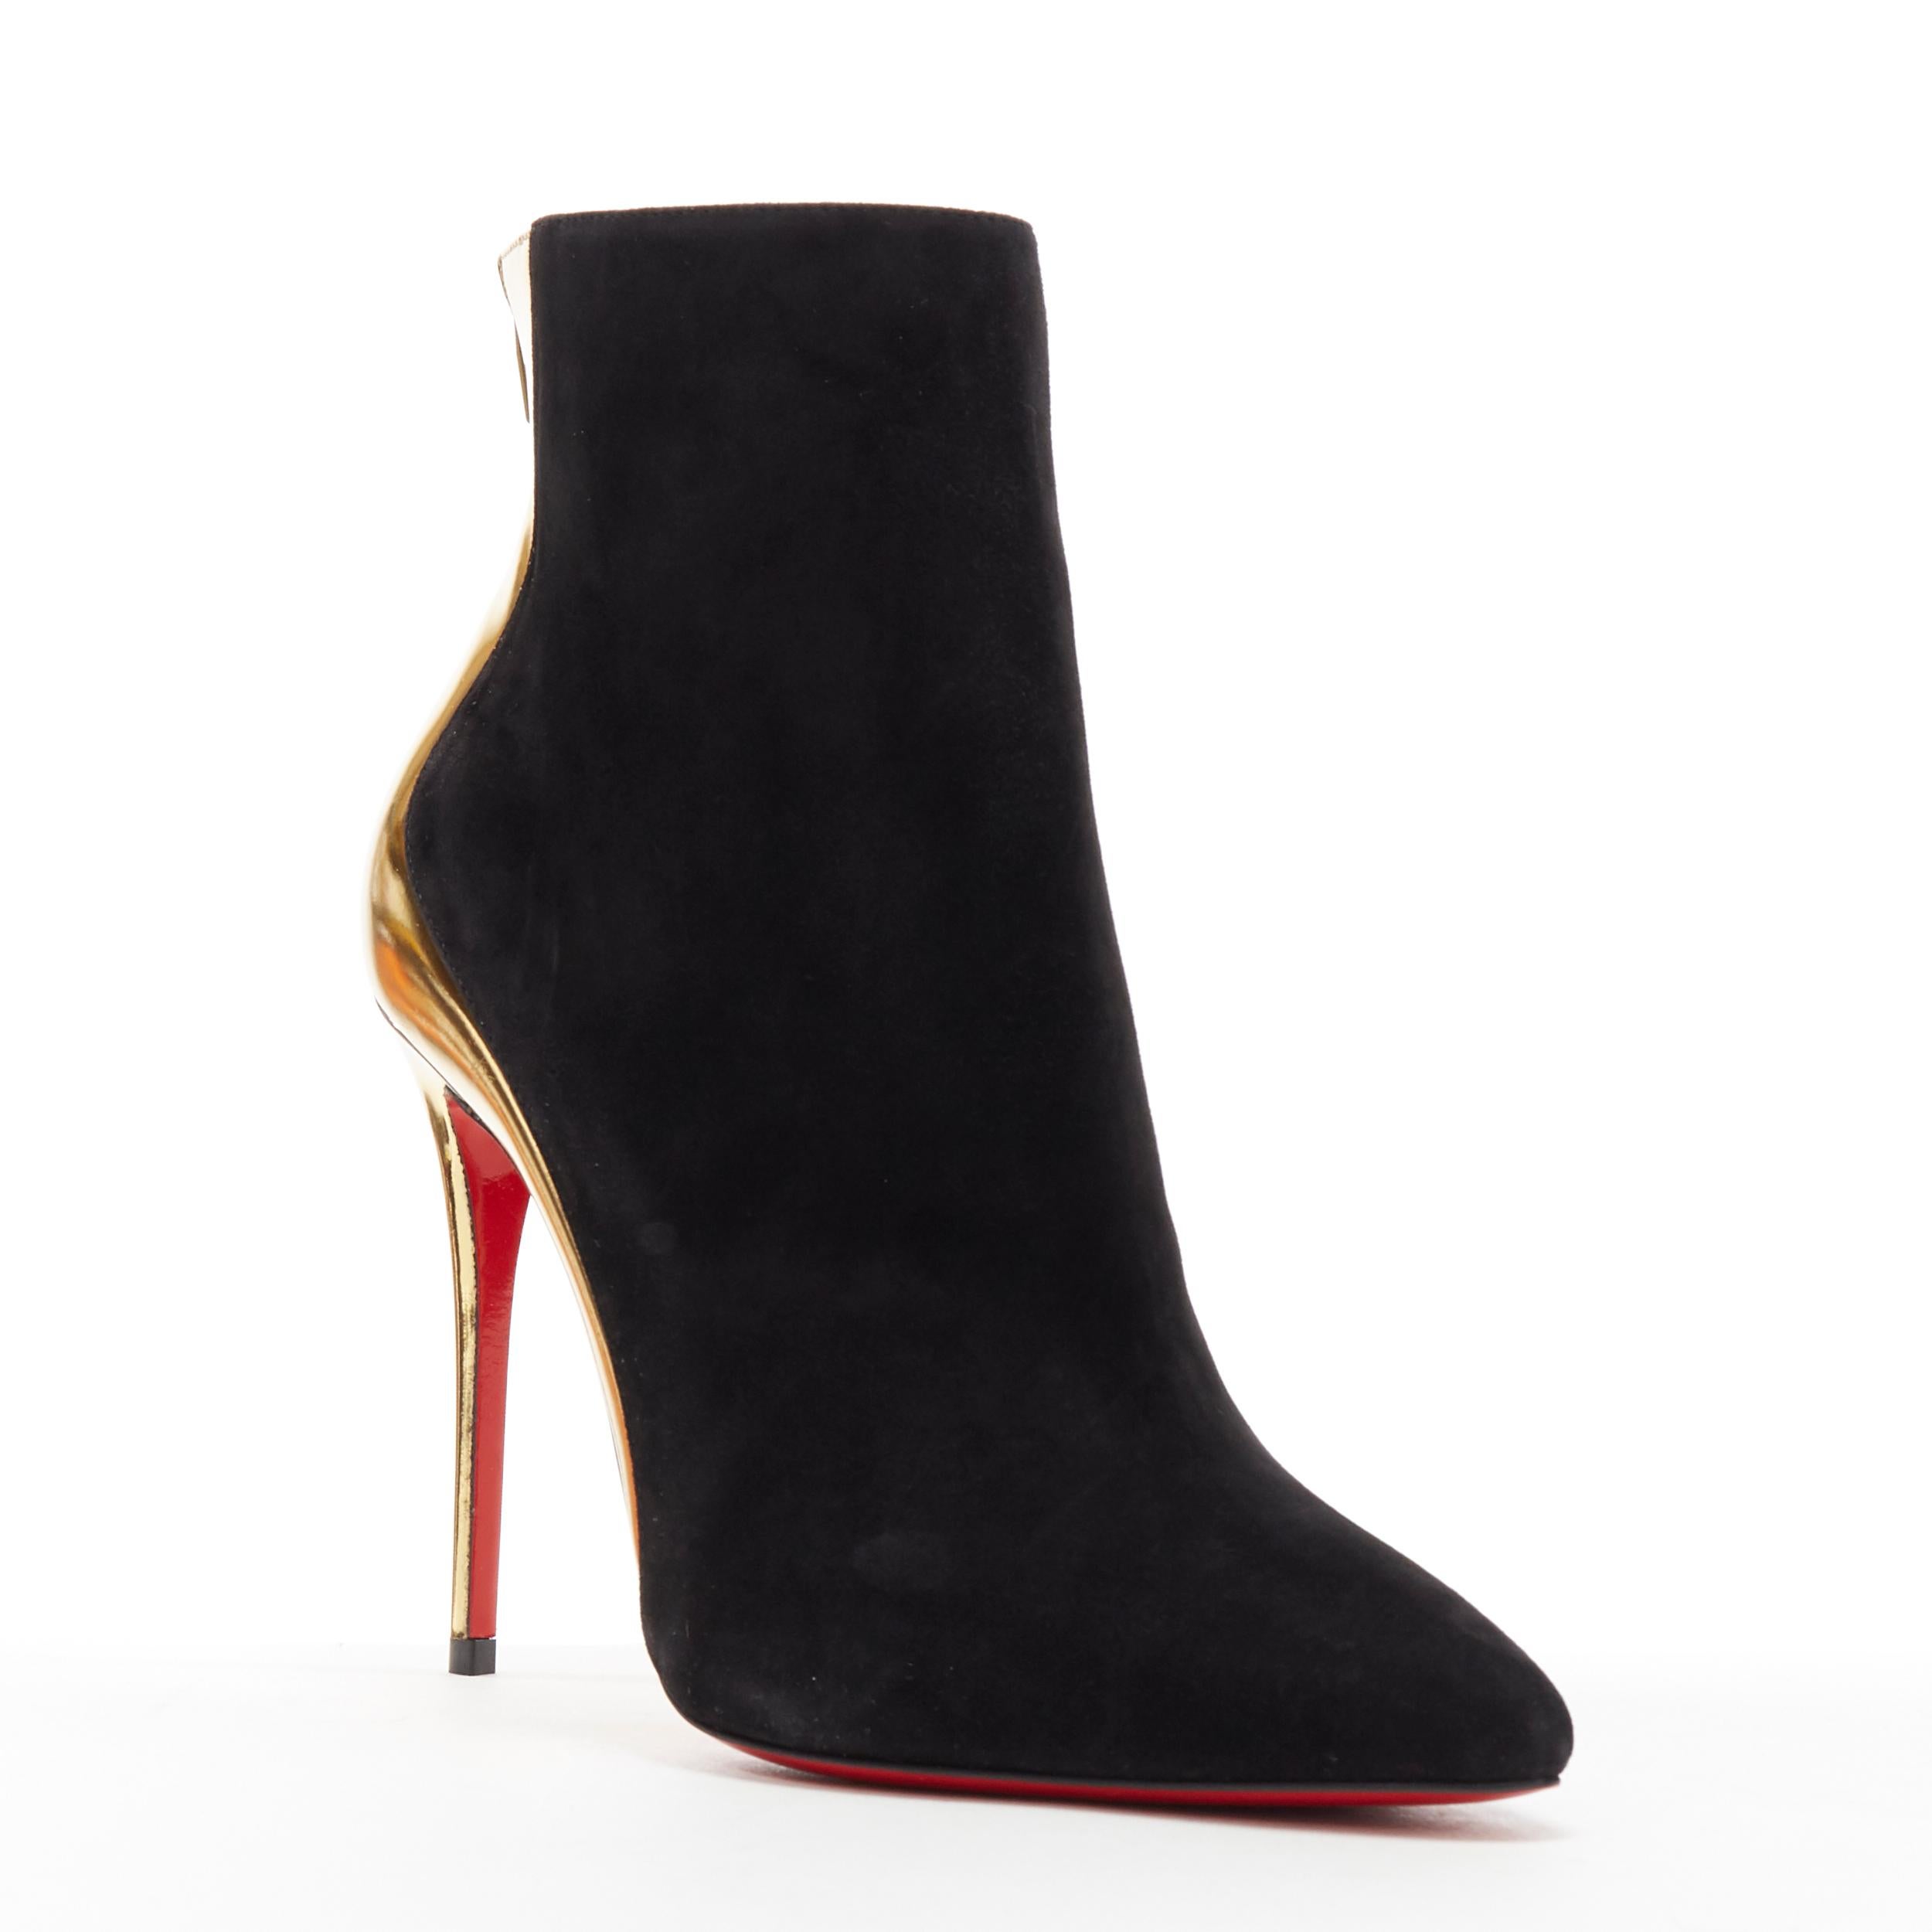 new CHRISTIAN LOUBOUTIN Delicotte 100 black suede gold mirrored heel bootie EU37
Brand: Christian Louboutin
Designer: Christian Louboutin
Model Name / Style: Delicotte 100
Material: Suede
Color: Black
Pattern: Solid
Closure: Zip
Extra Detail: Style